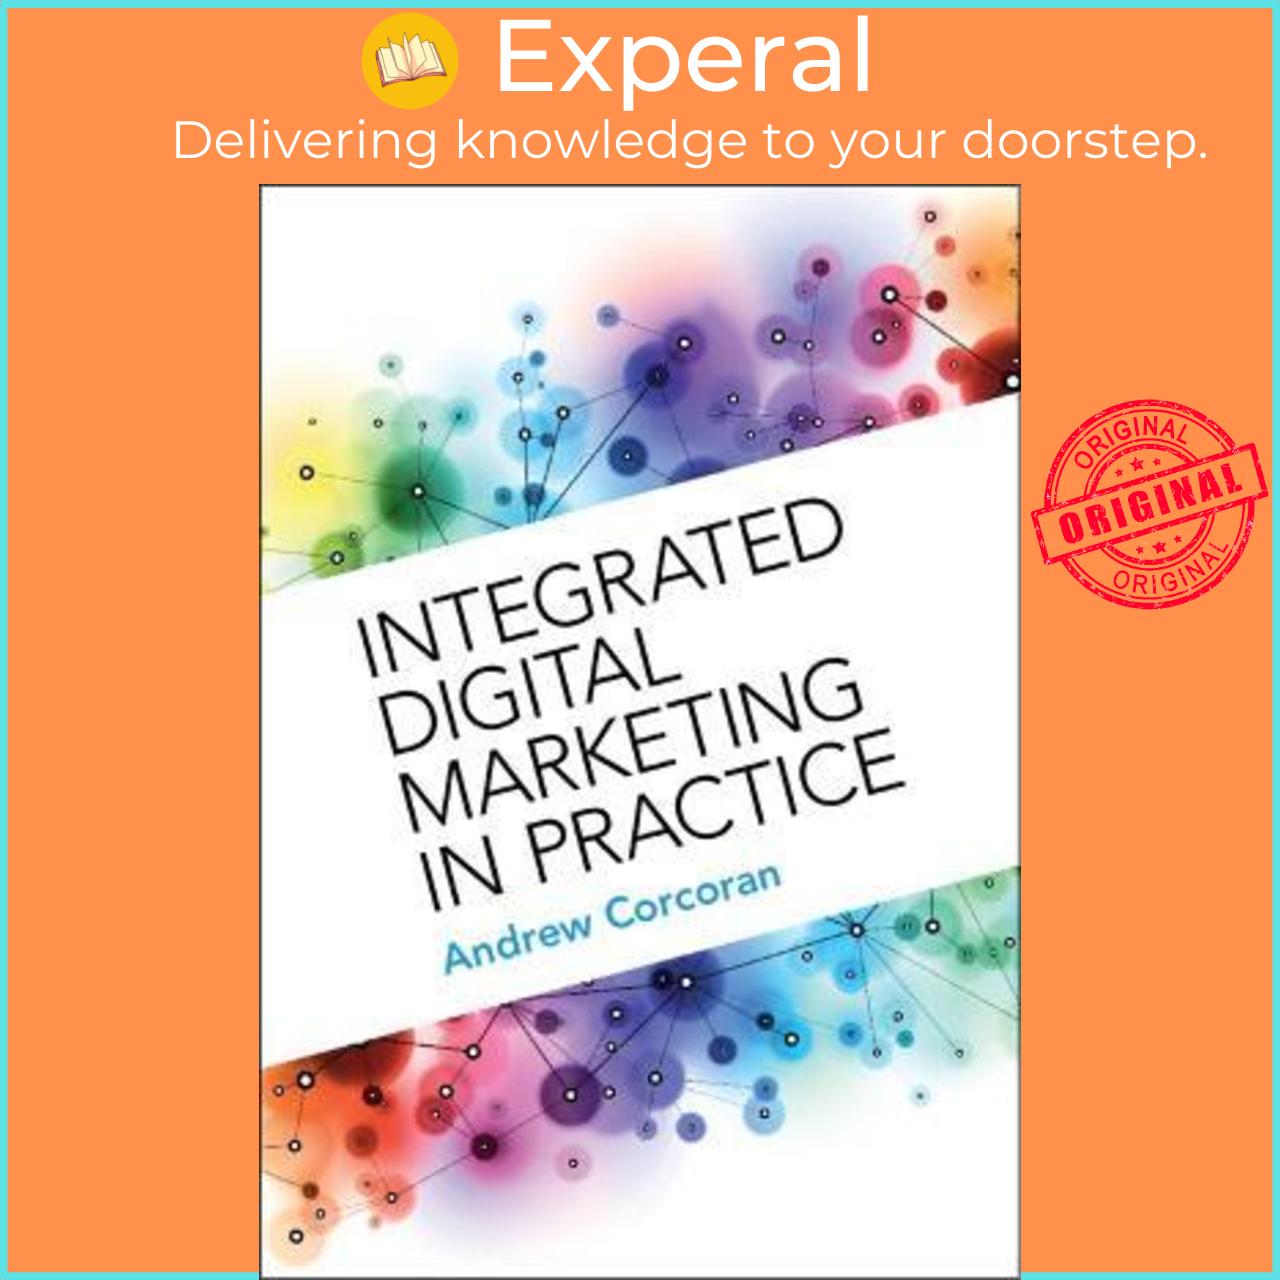 Sách - Integrated Digital Marketing in Practice by Andrew Corcoran (UK edition, paperback)